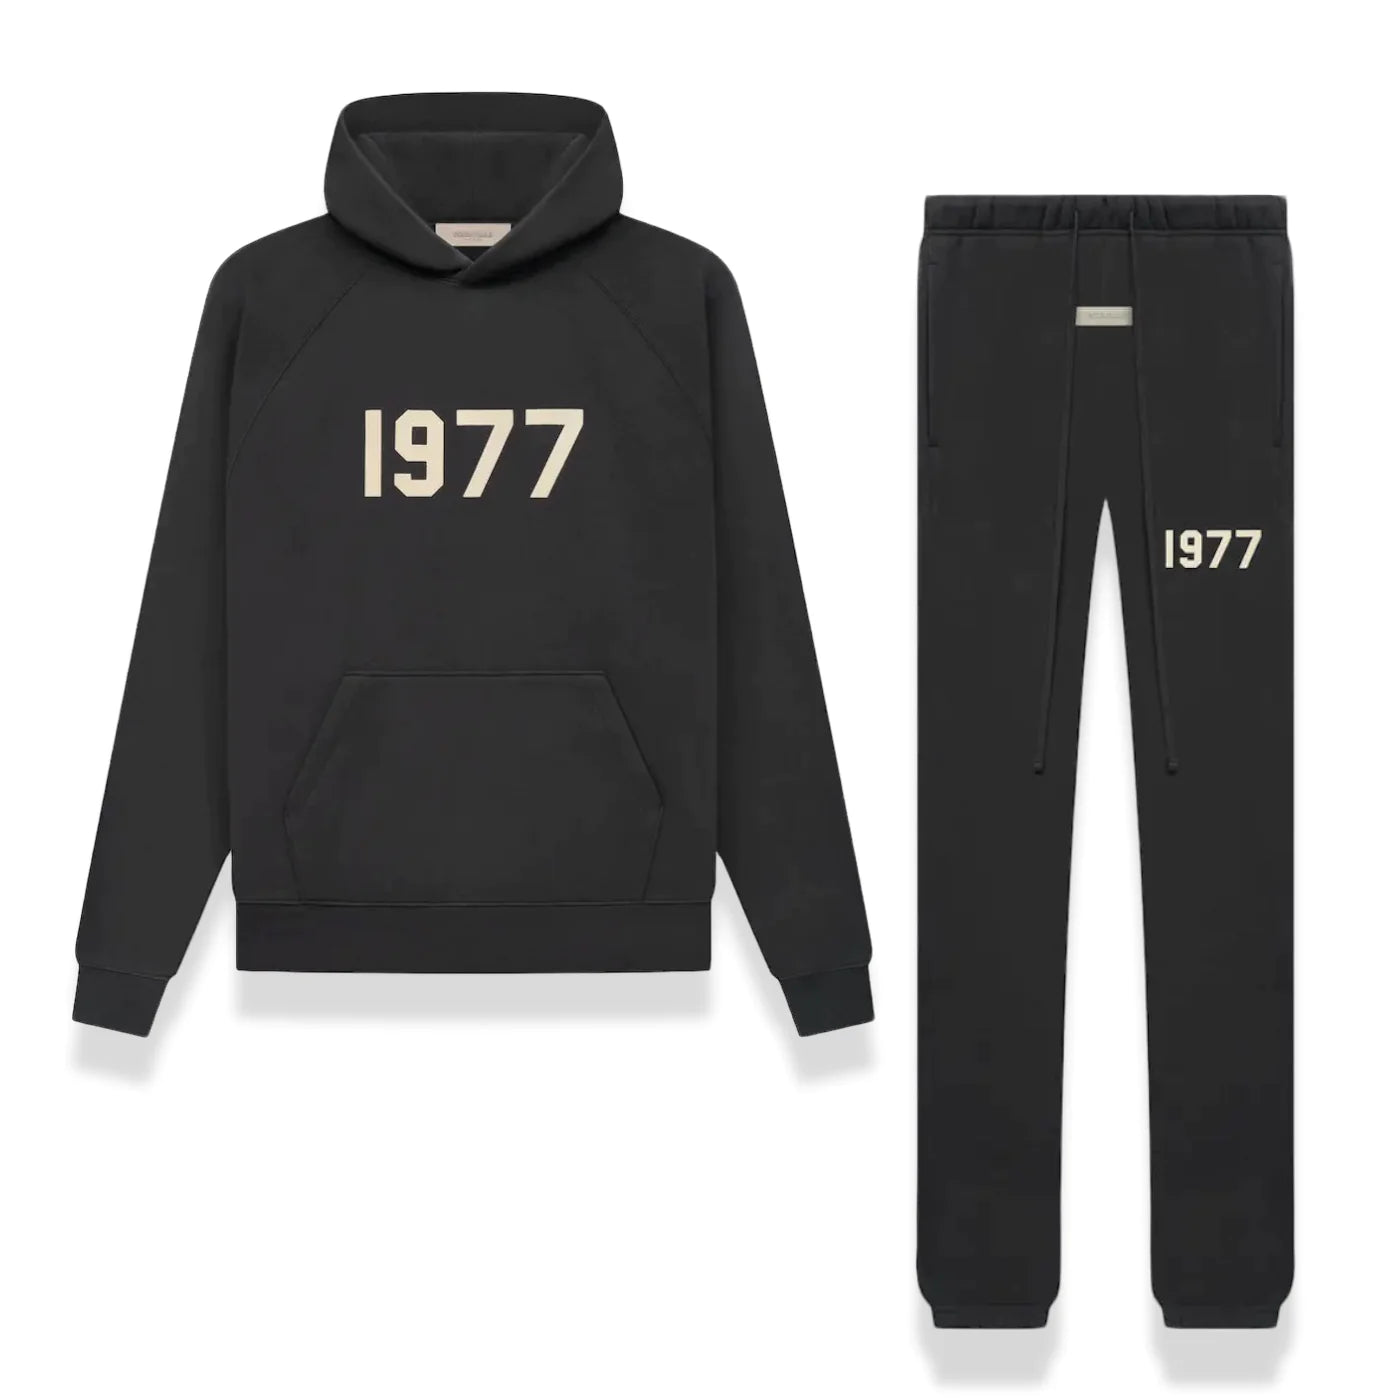 Fear Of God Essentials Tracksuit (SS22) Iron 1977